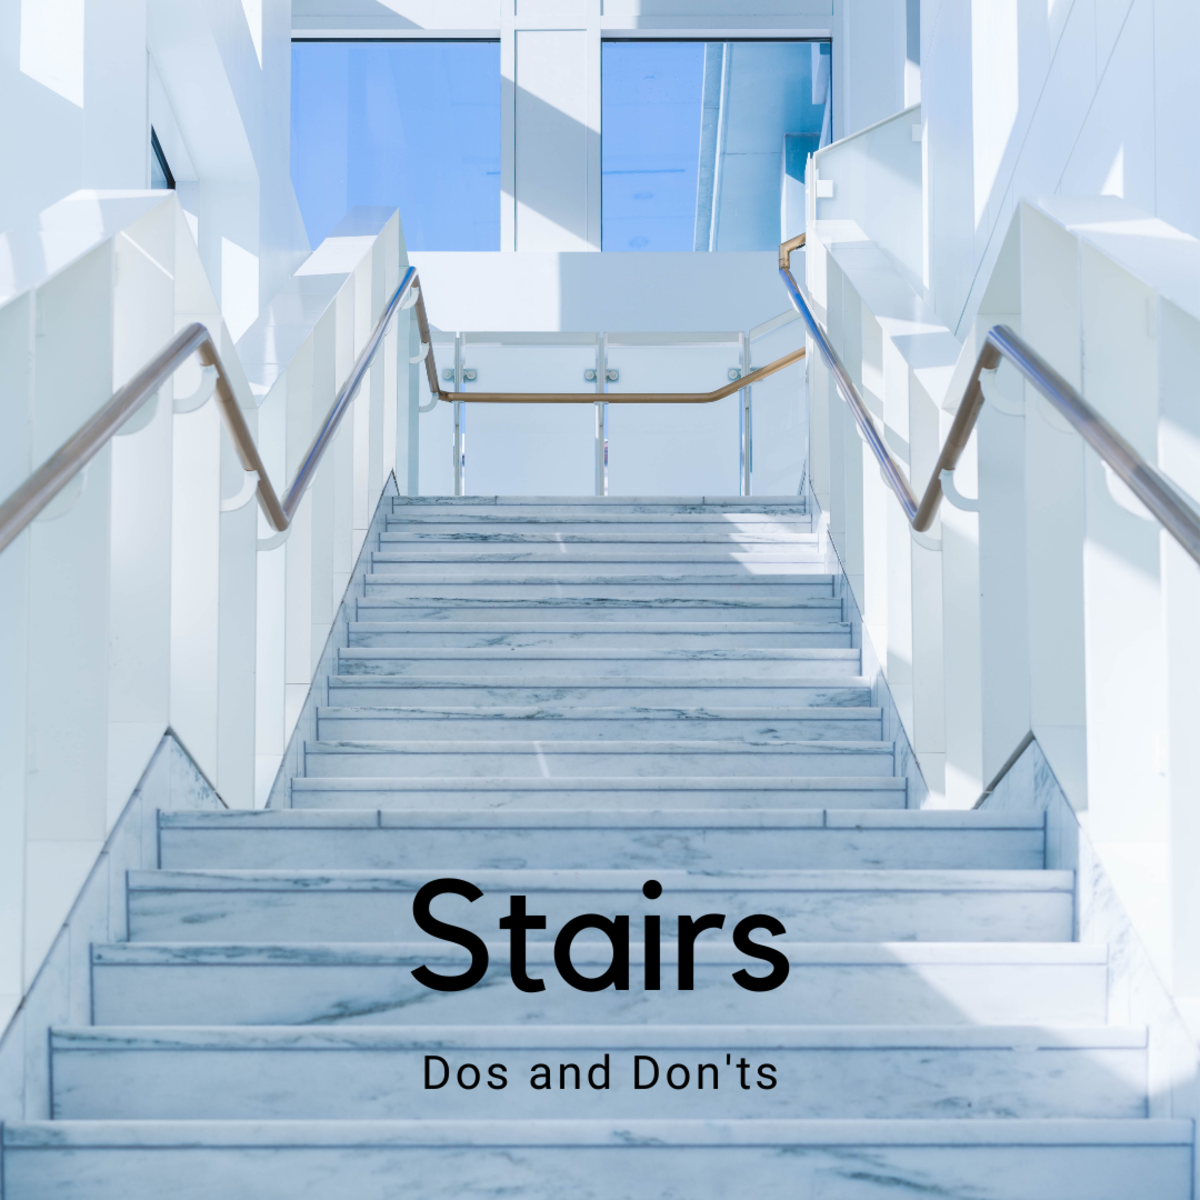 Stairs Etiquette 101 (Yes, There's a Right Way!)